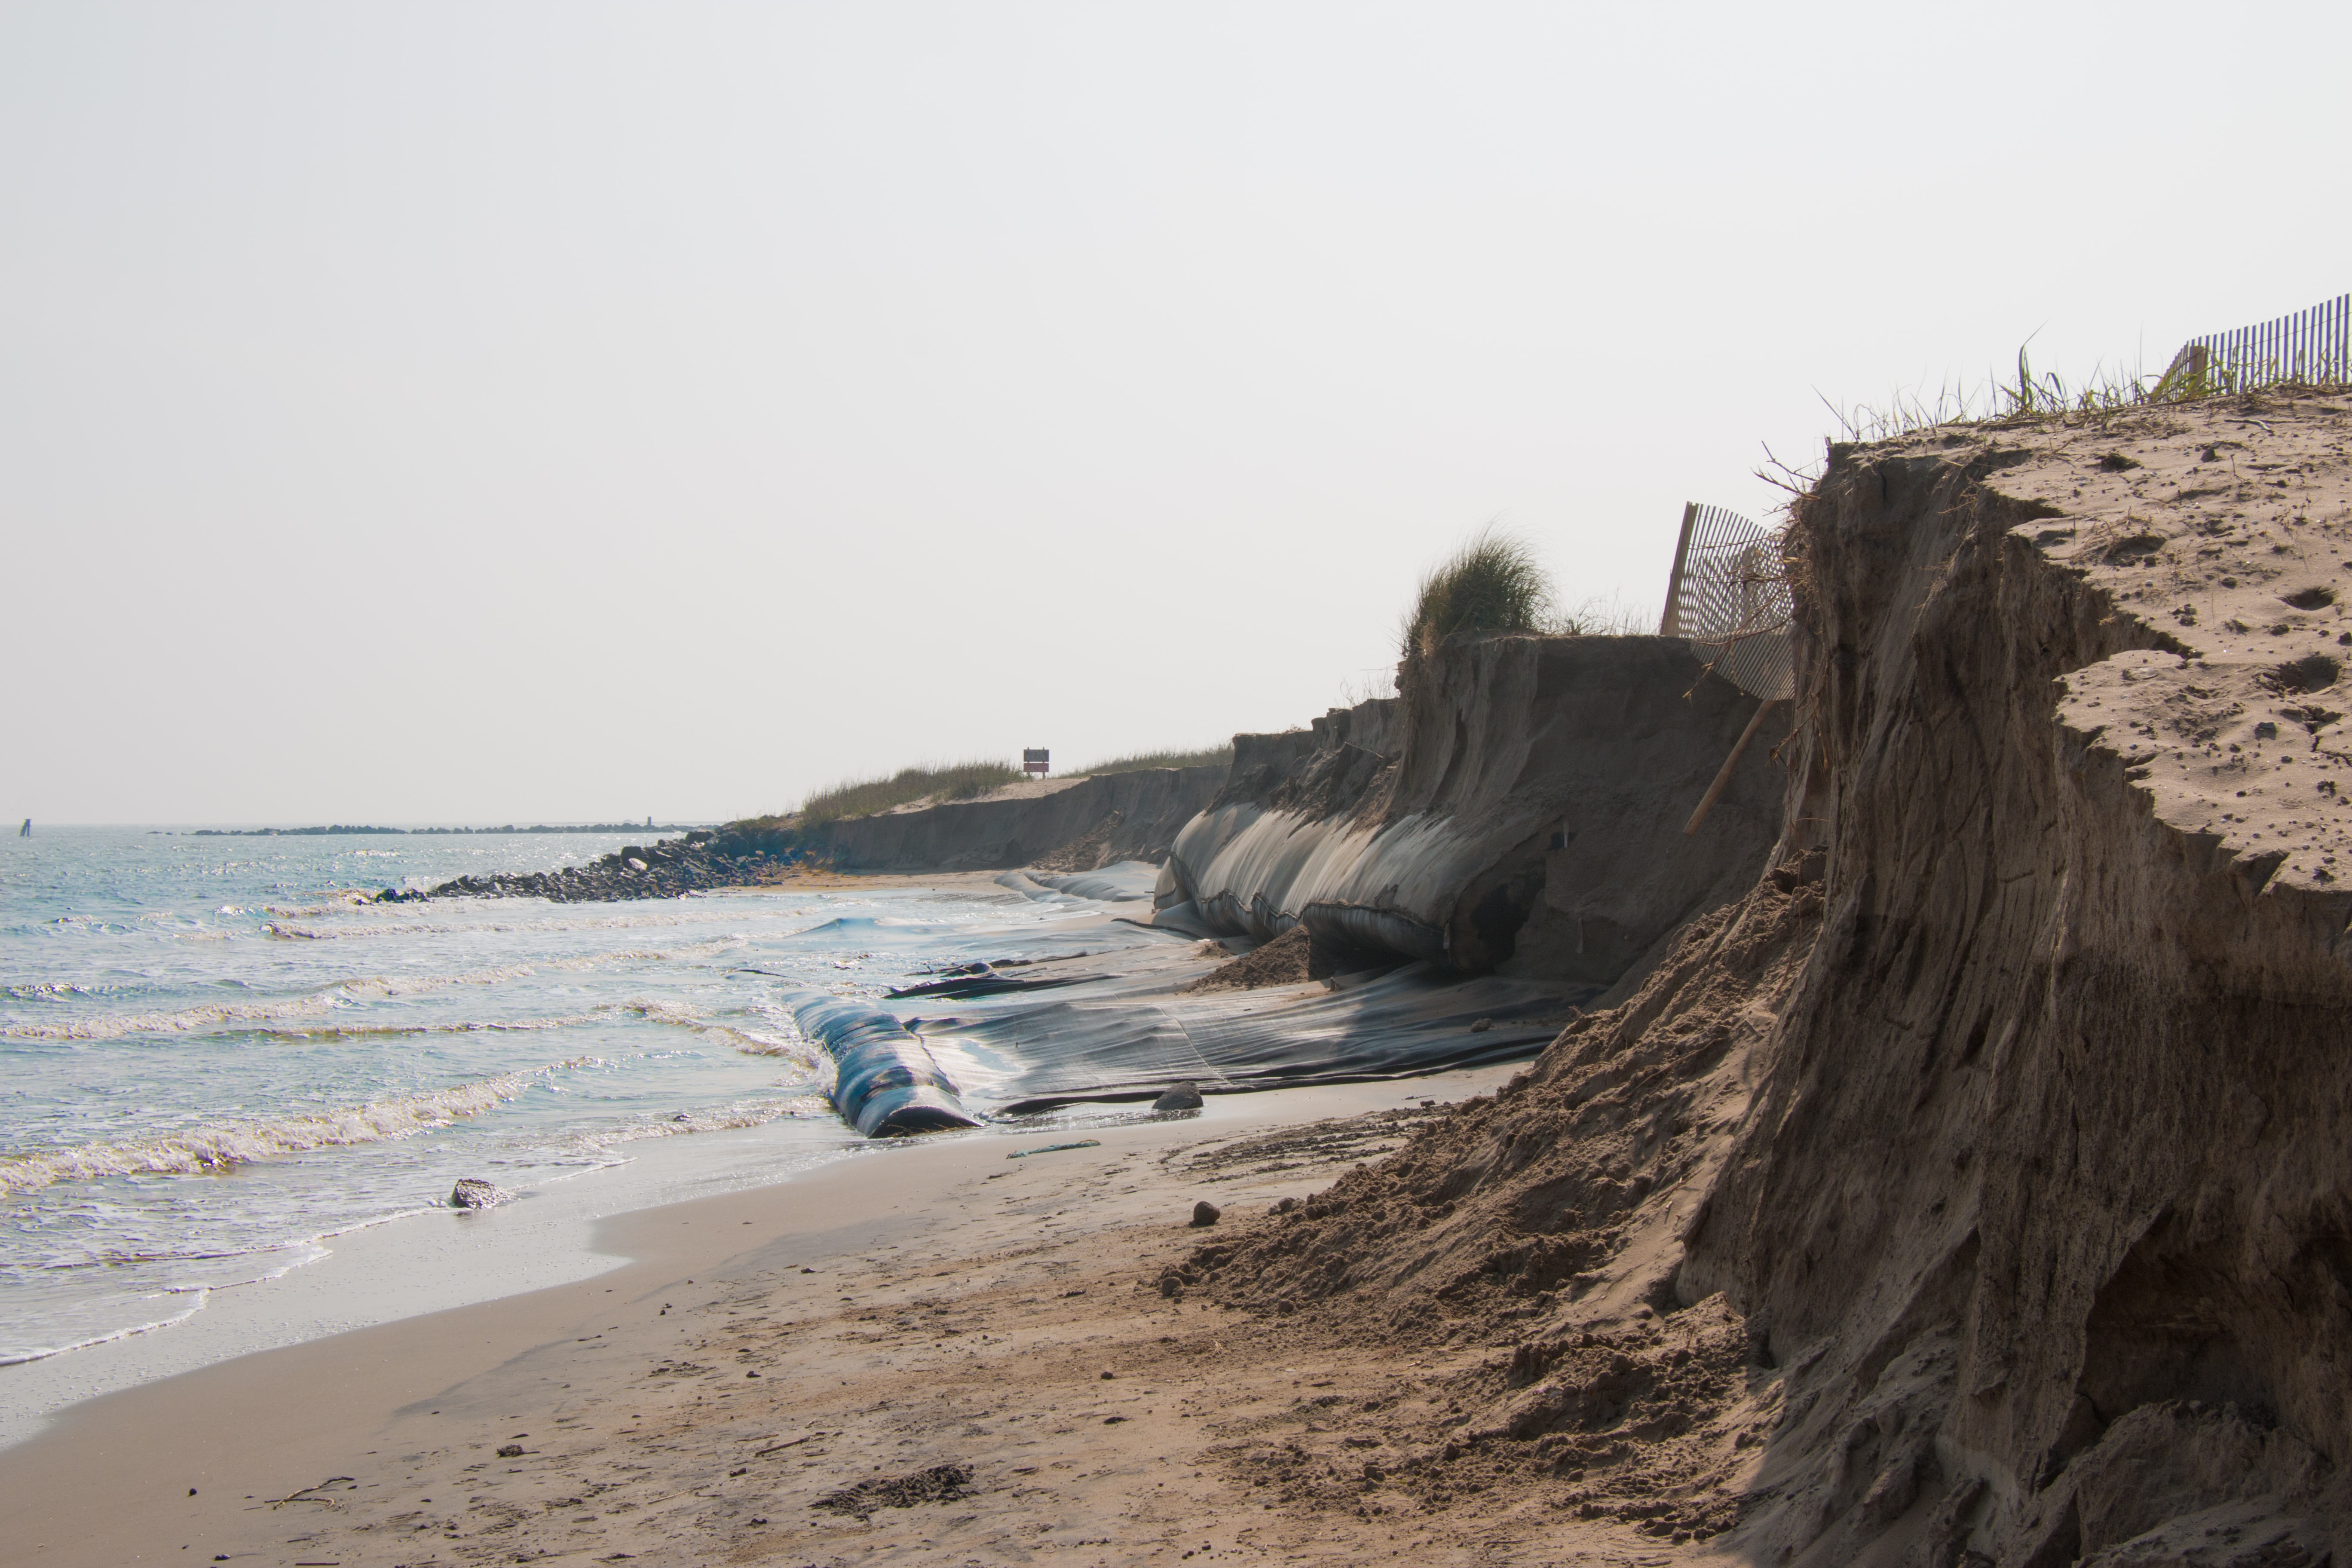 On the southwest end of Grand Isle, the erosion is visible. Barriers, composed of sand in plastic liners, were placed to hold back the ocean but natural forces have just been too powerful.